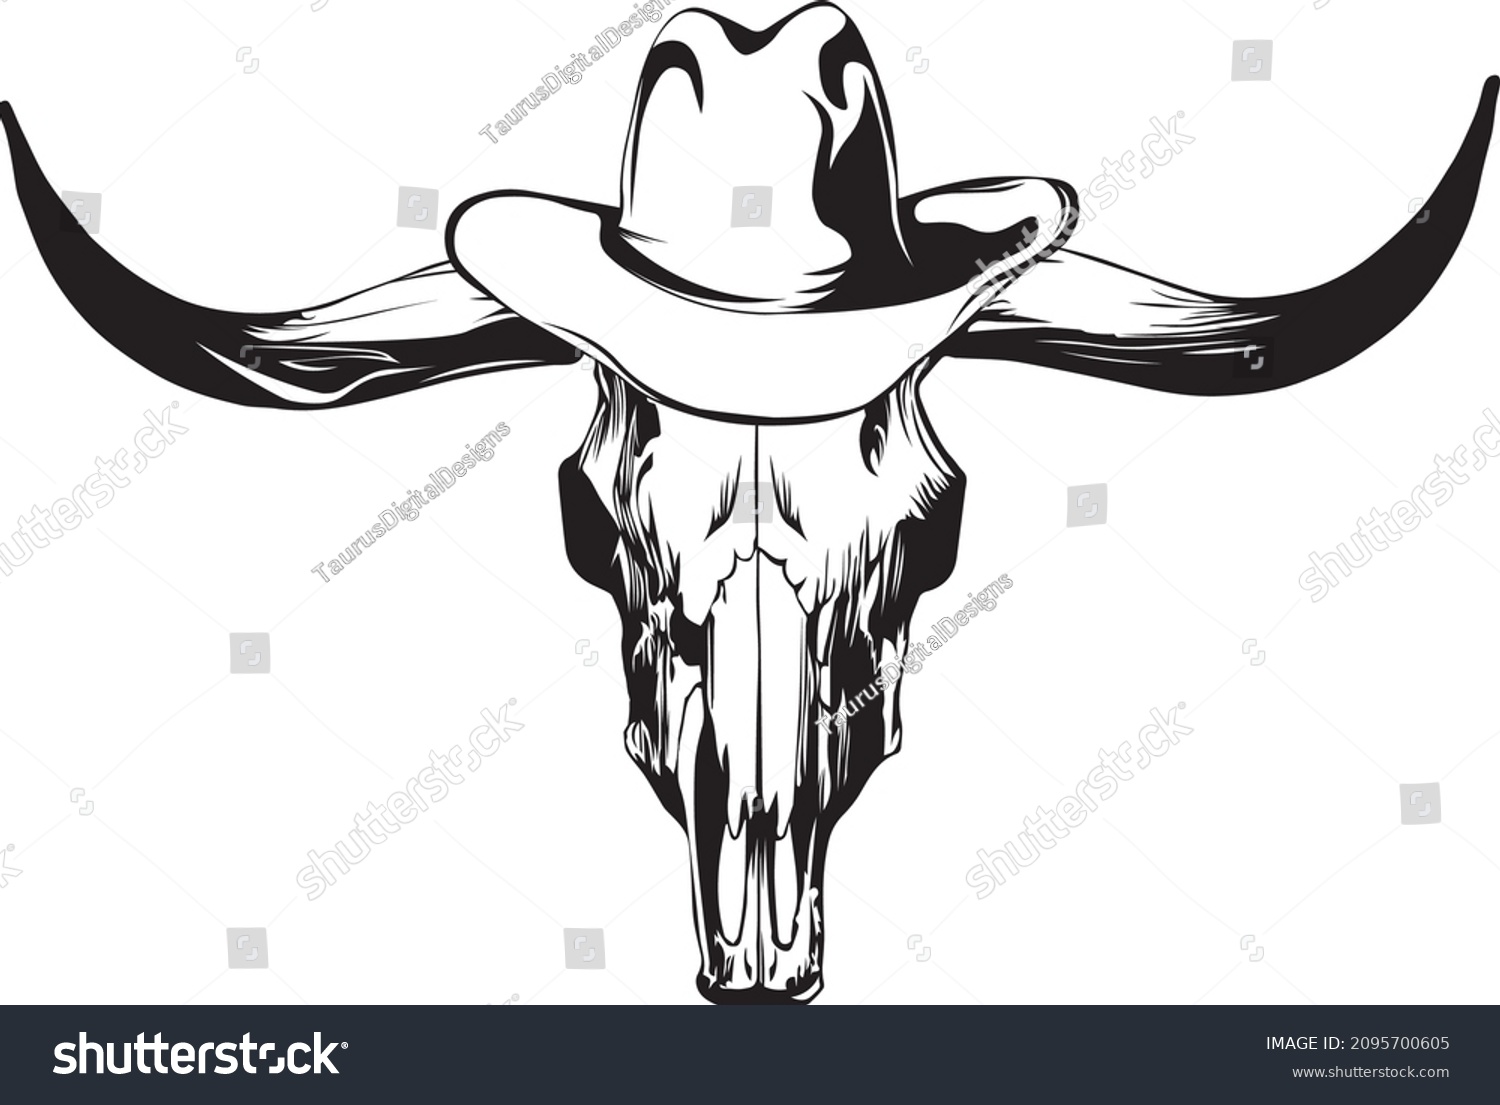 SVG of Bull skull in cowboy hat SVG design for cowboy logos and tattoo templates	
 svg